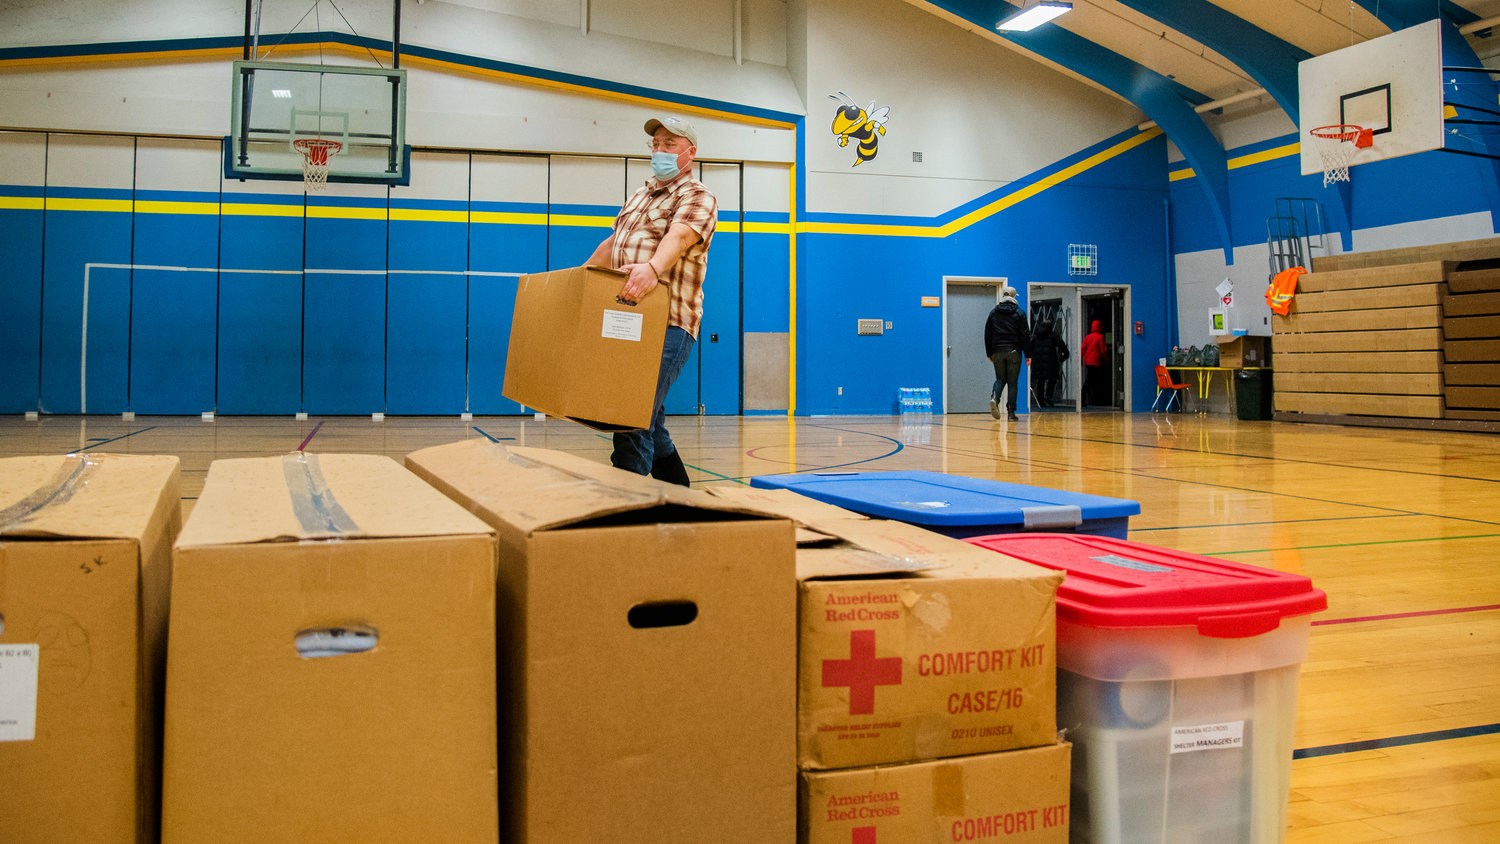 Public Health Director JP Anderson carries American Red Cross supplies into Centralia Middle School Thursday evening.